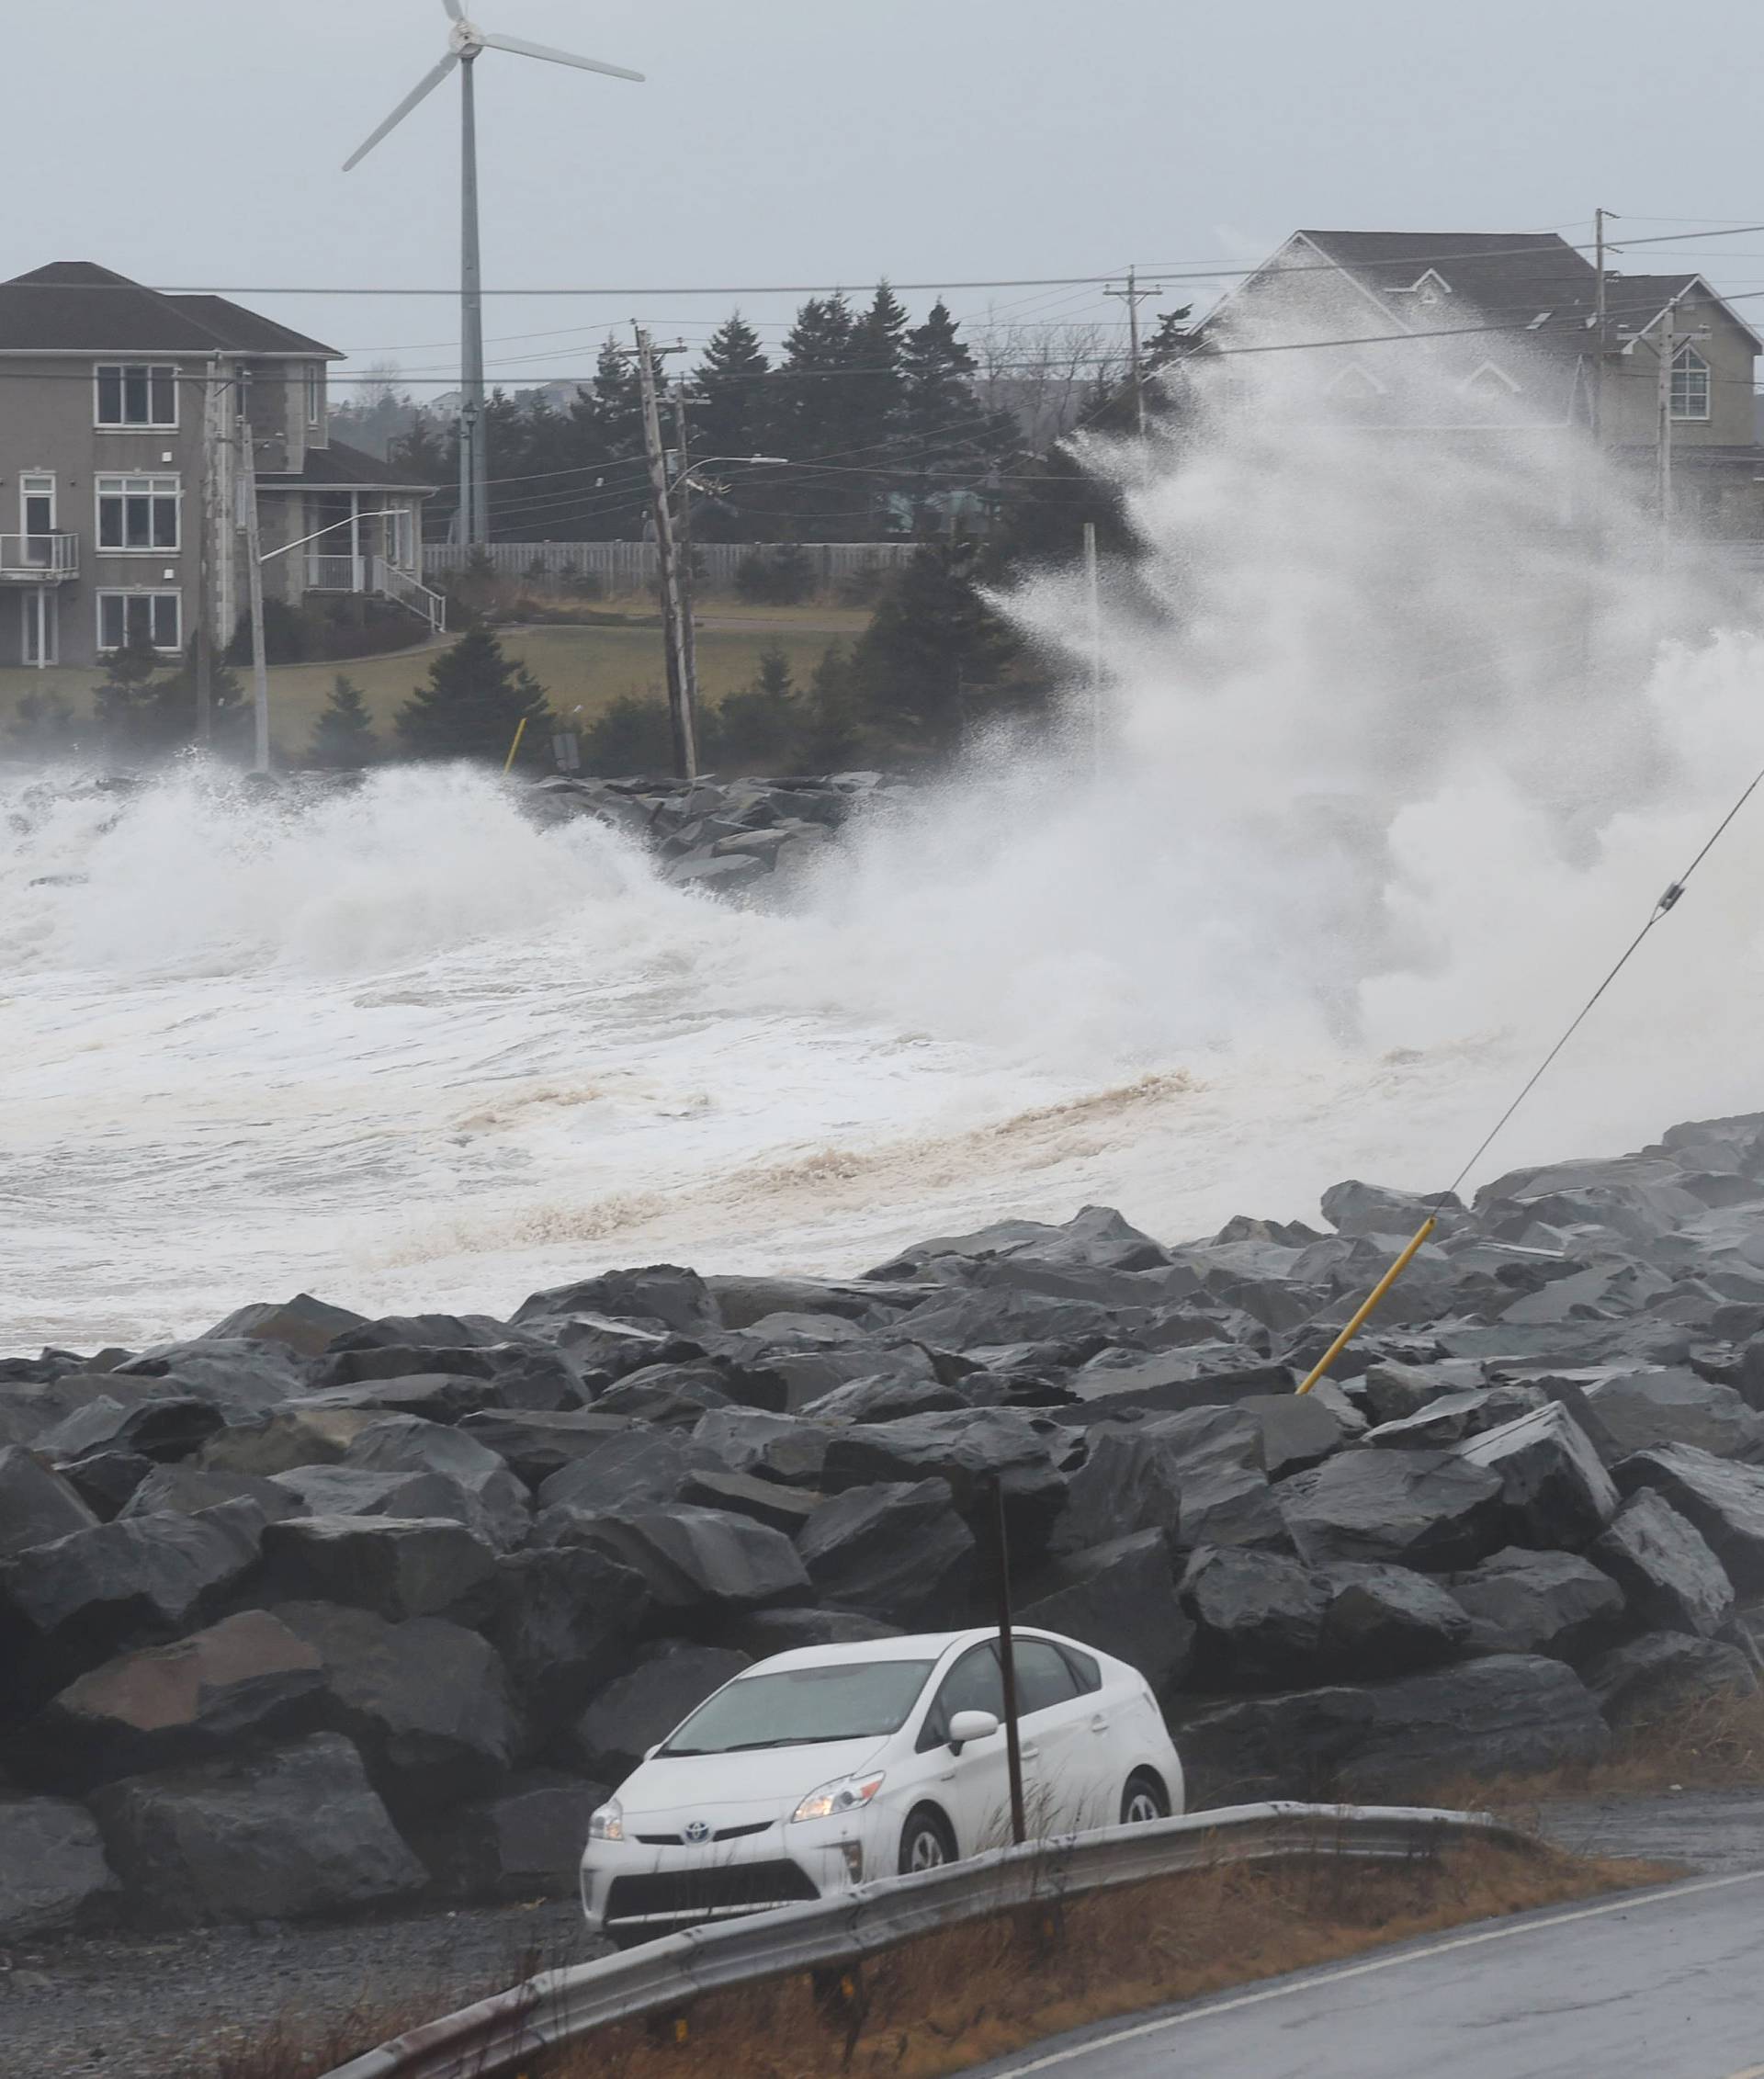 A storm surge from the Atlantic Ocean hits a break wall during Winter Storm Grayson in Cow Bay